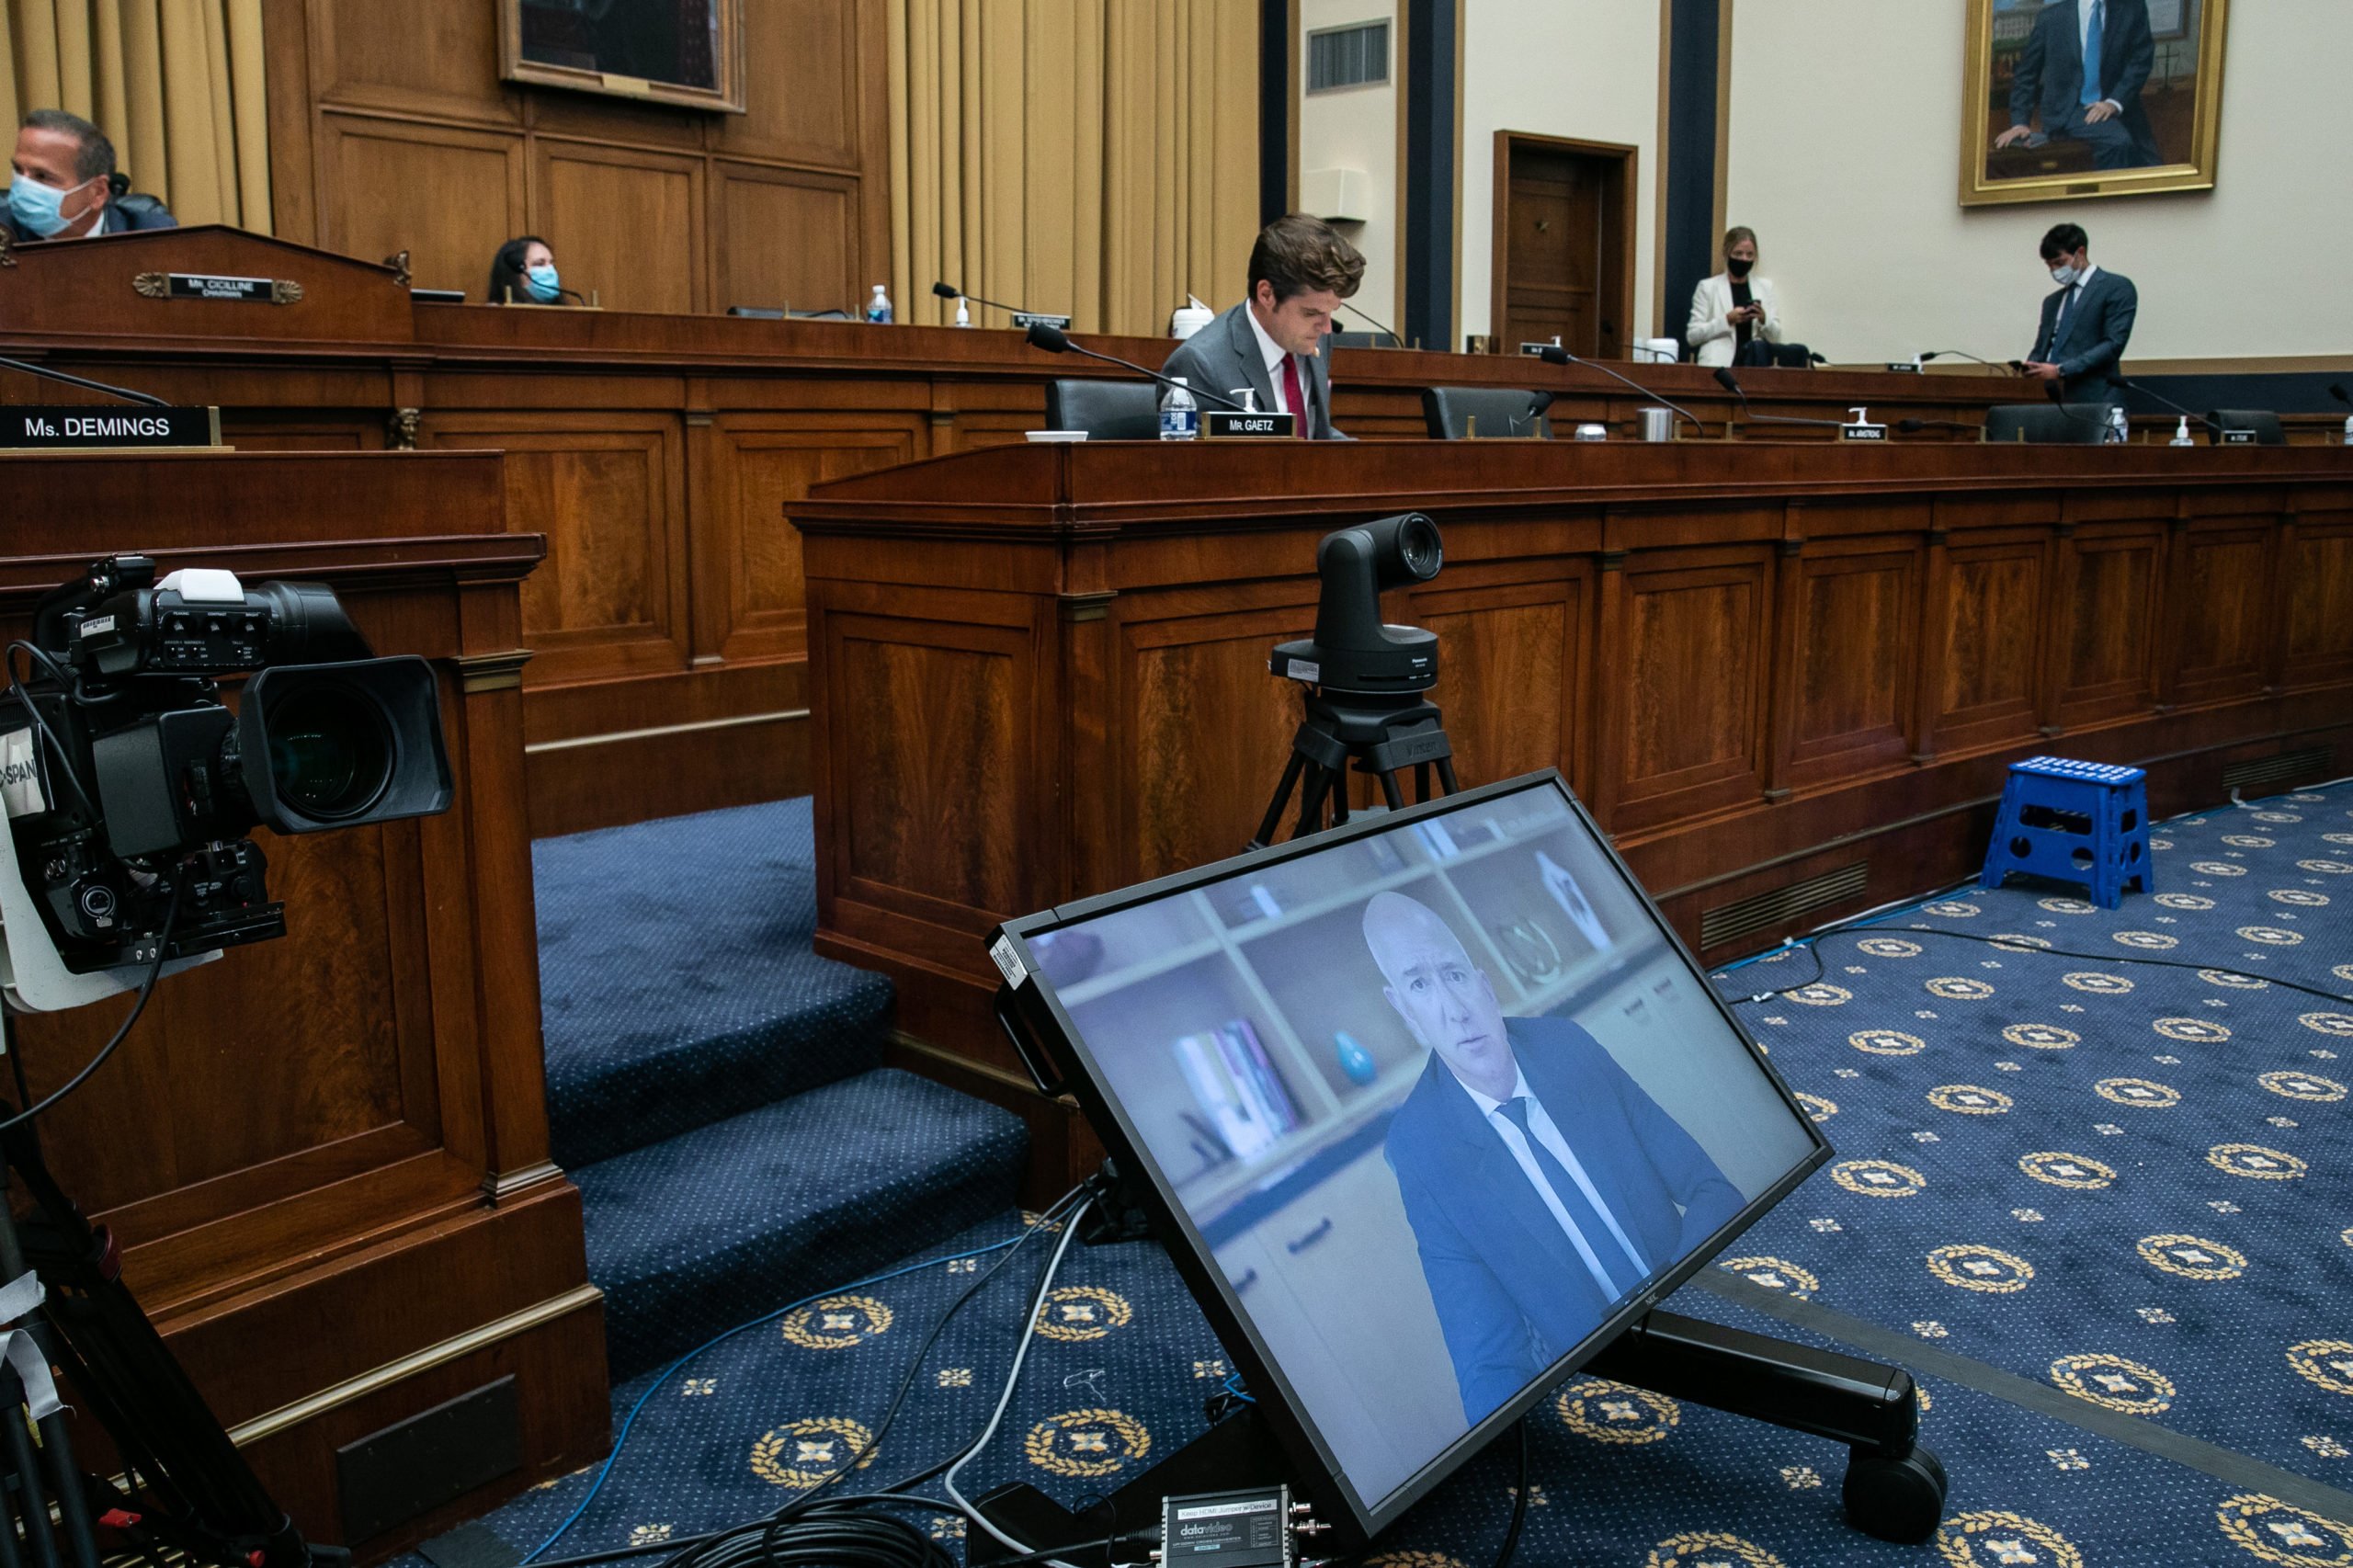 Amazon CEO Jeff Bezos testifies via video conference during a House Judiciary Committee hearing on July 29. (Graeme Jennings/Pool/Getty Images)